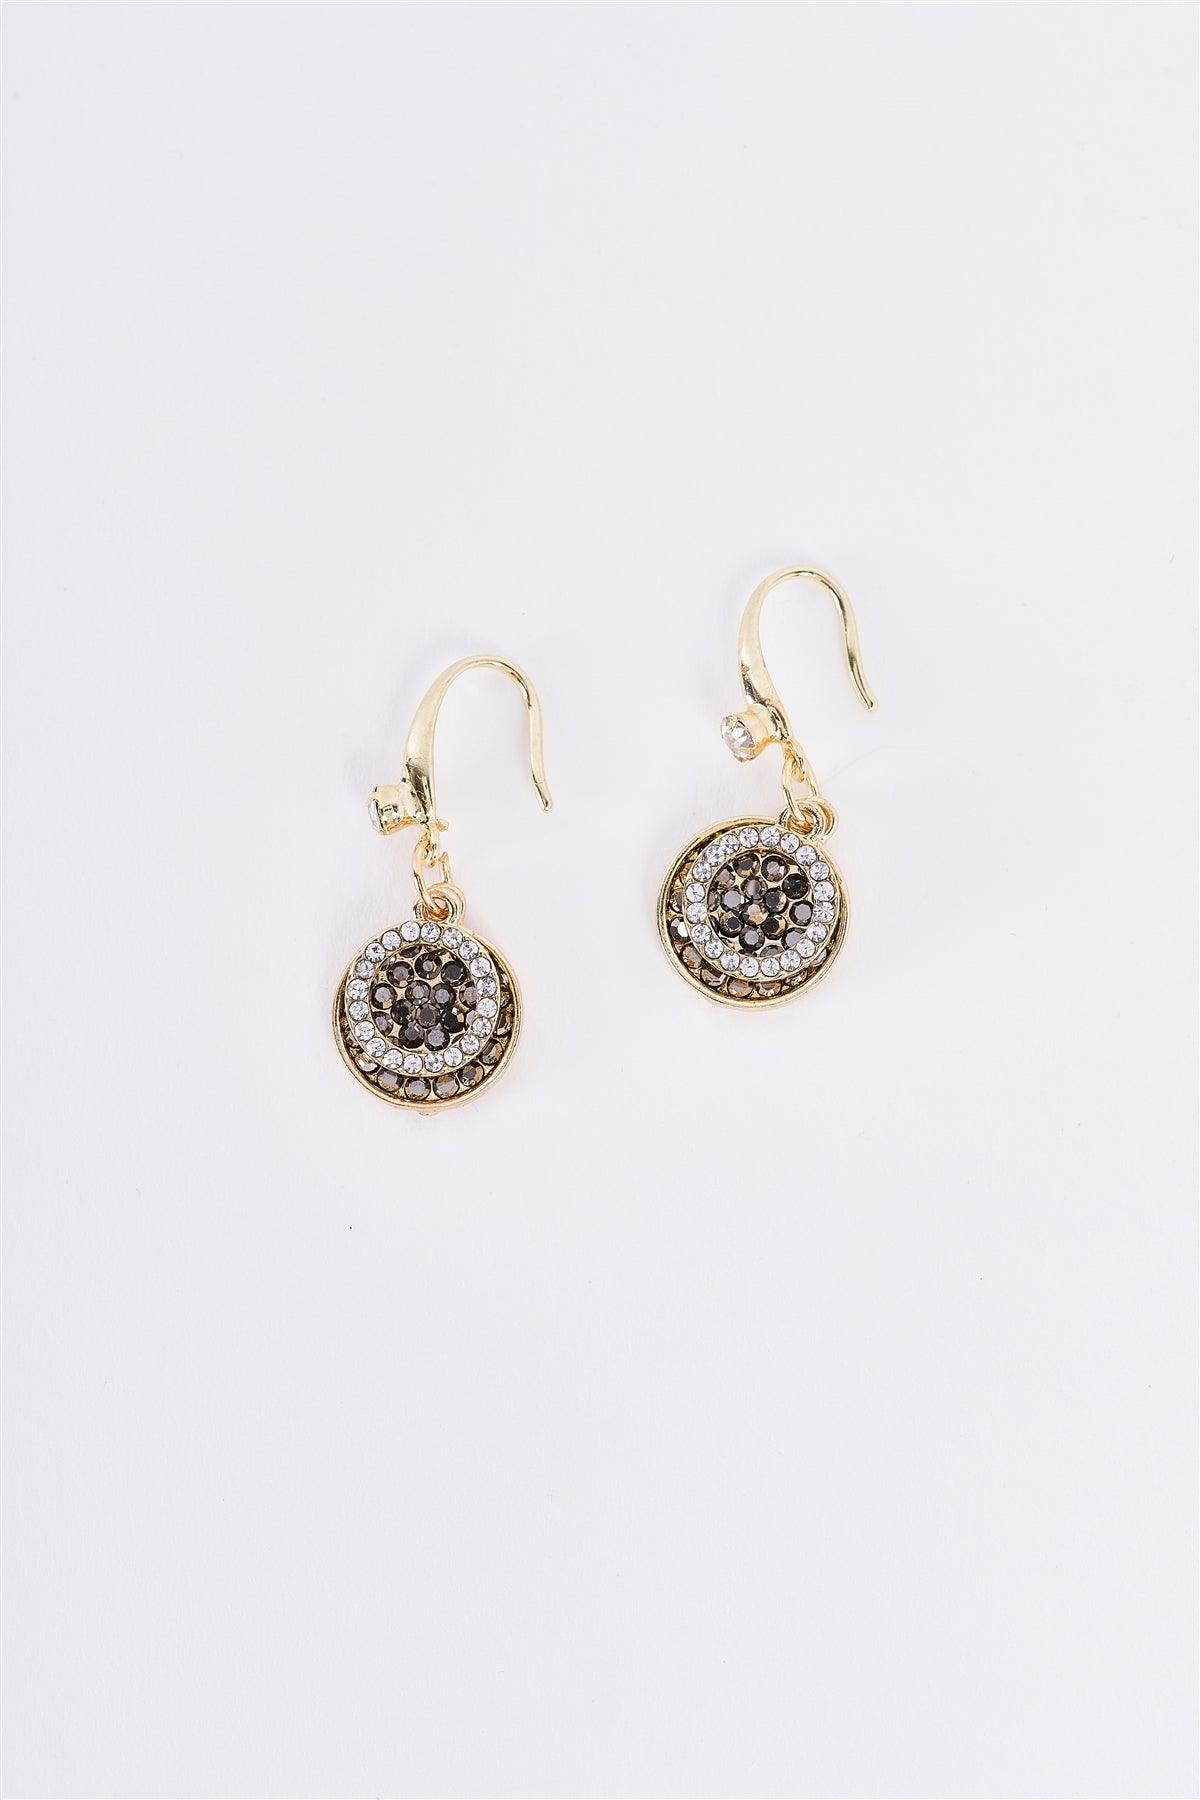 Gold & Black And White Rhinestone Drop Earrings /3 Pieces